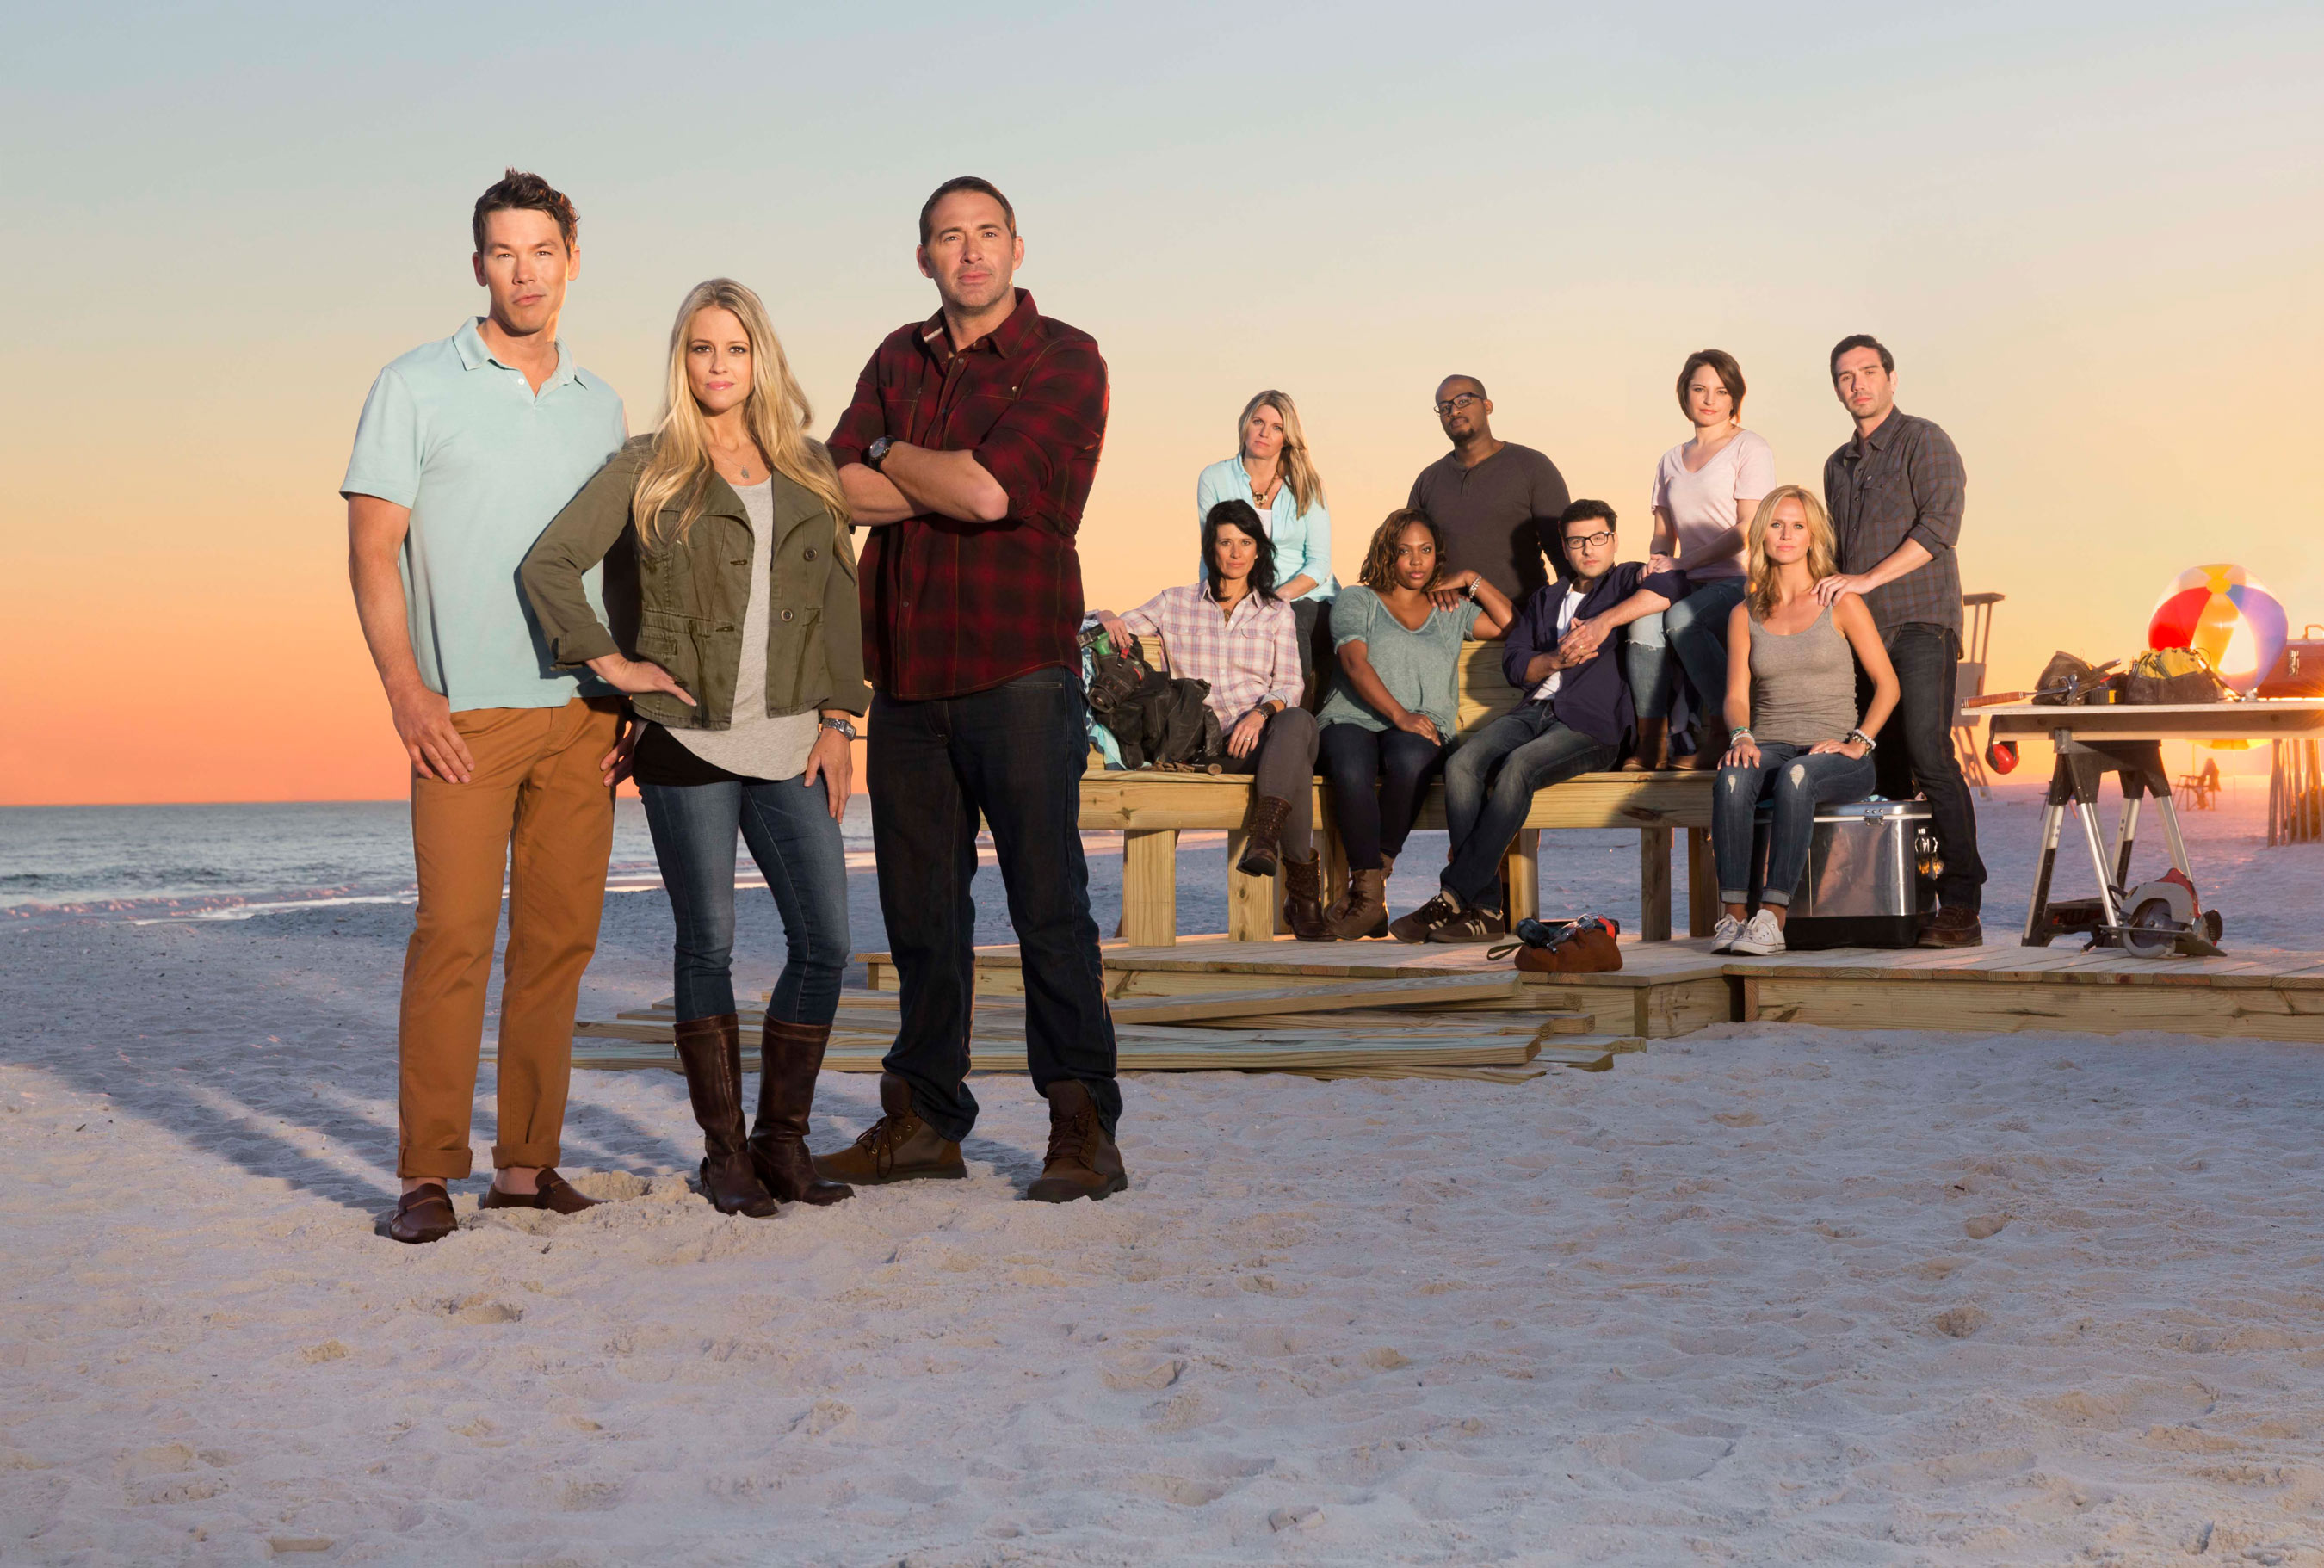 HGTV's Hot New Renovation Competition Series 'Beach Flip' Debuts July 5